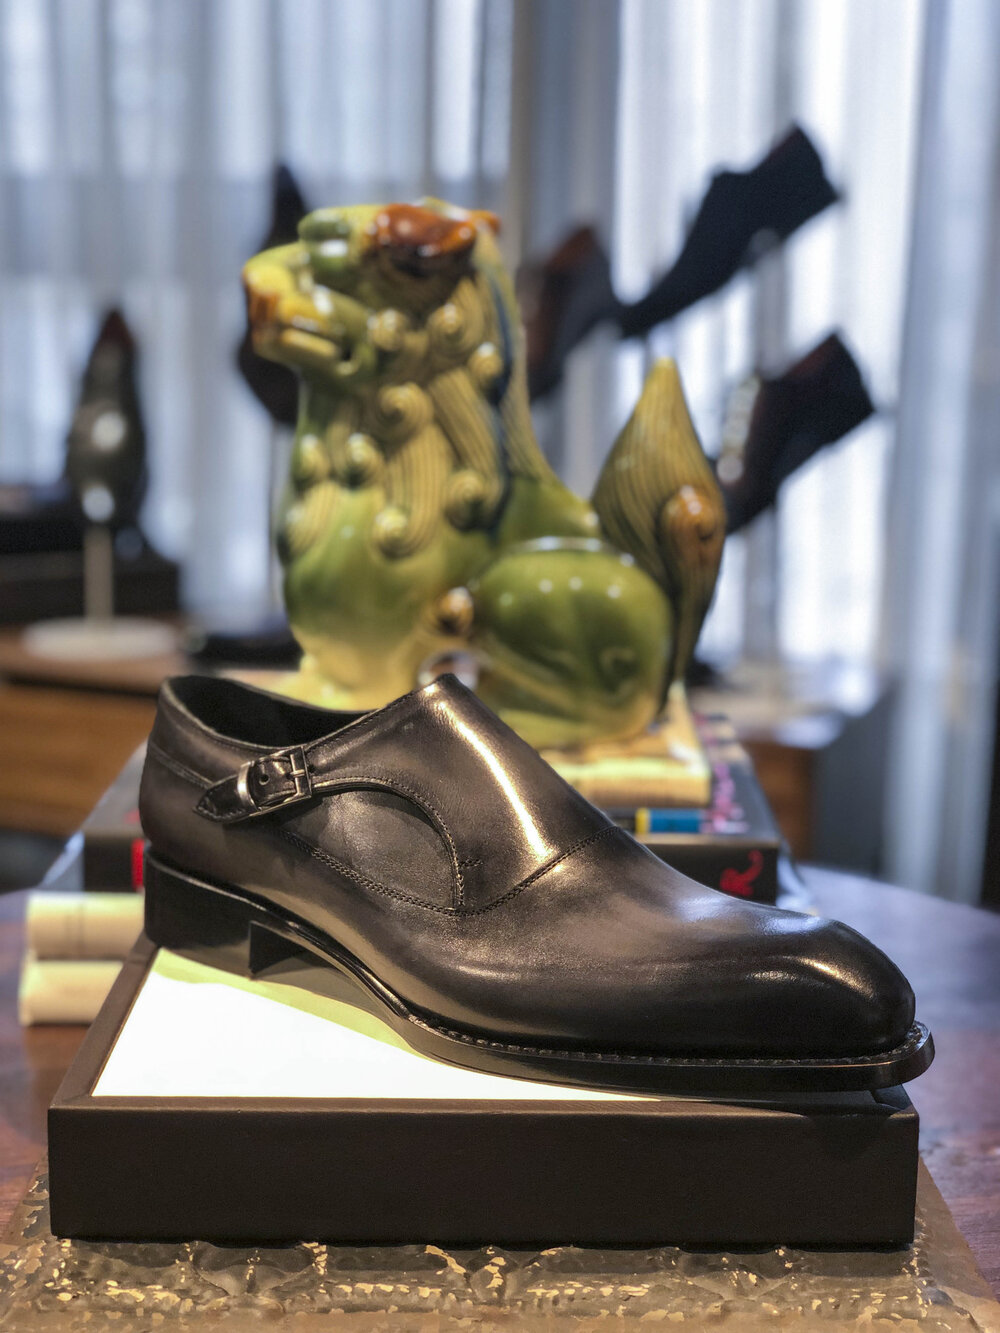 reap Monk subtle Custom Men's Dress Shoes in Chicago and San Francisco